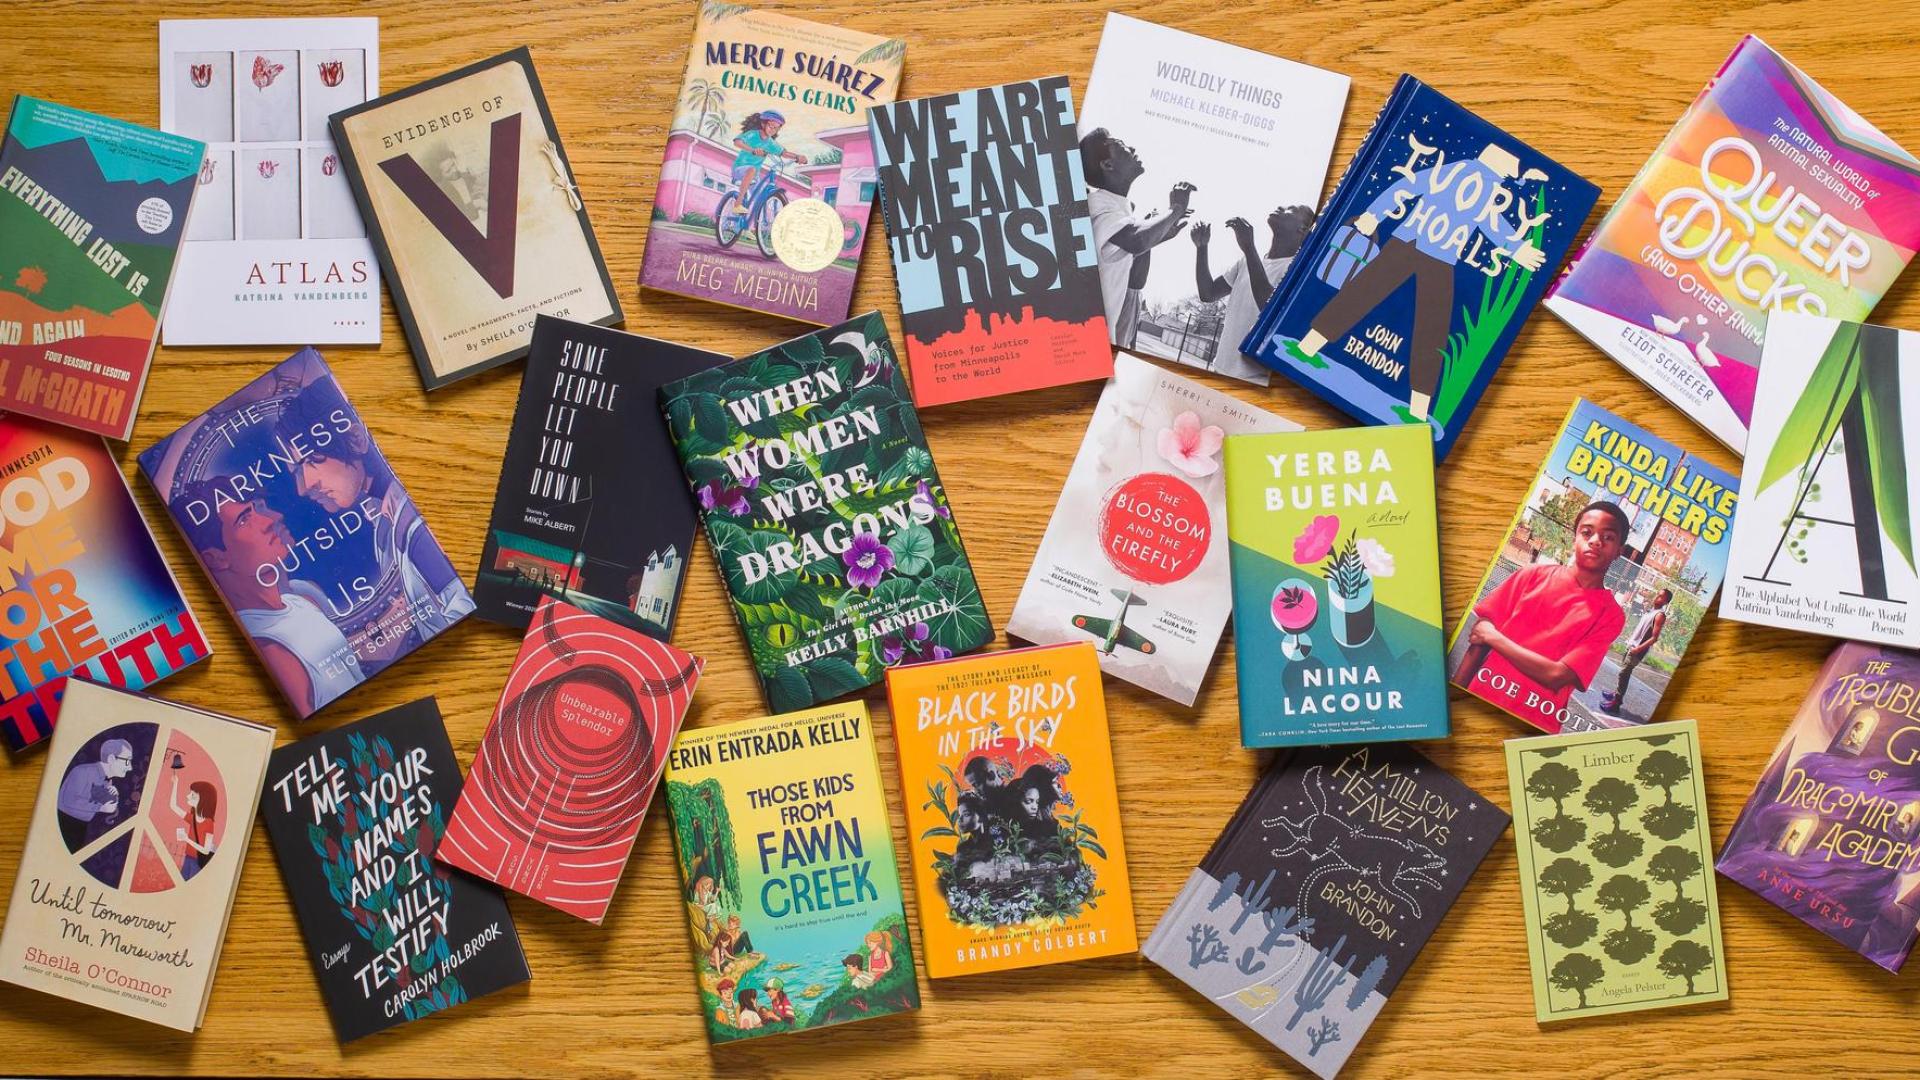 A selection of books written by Hamline creative writing faculty